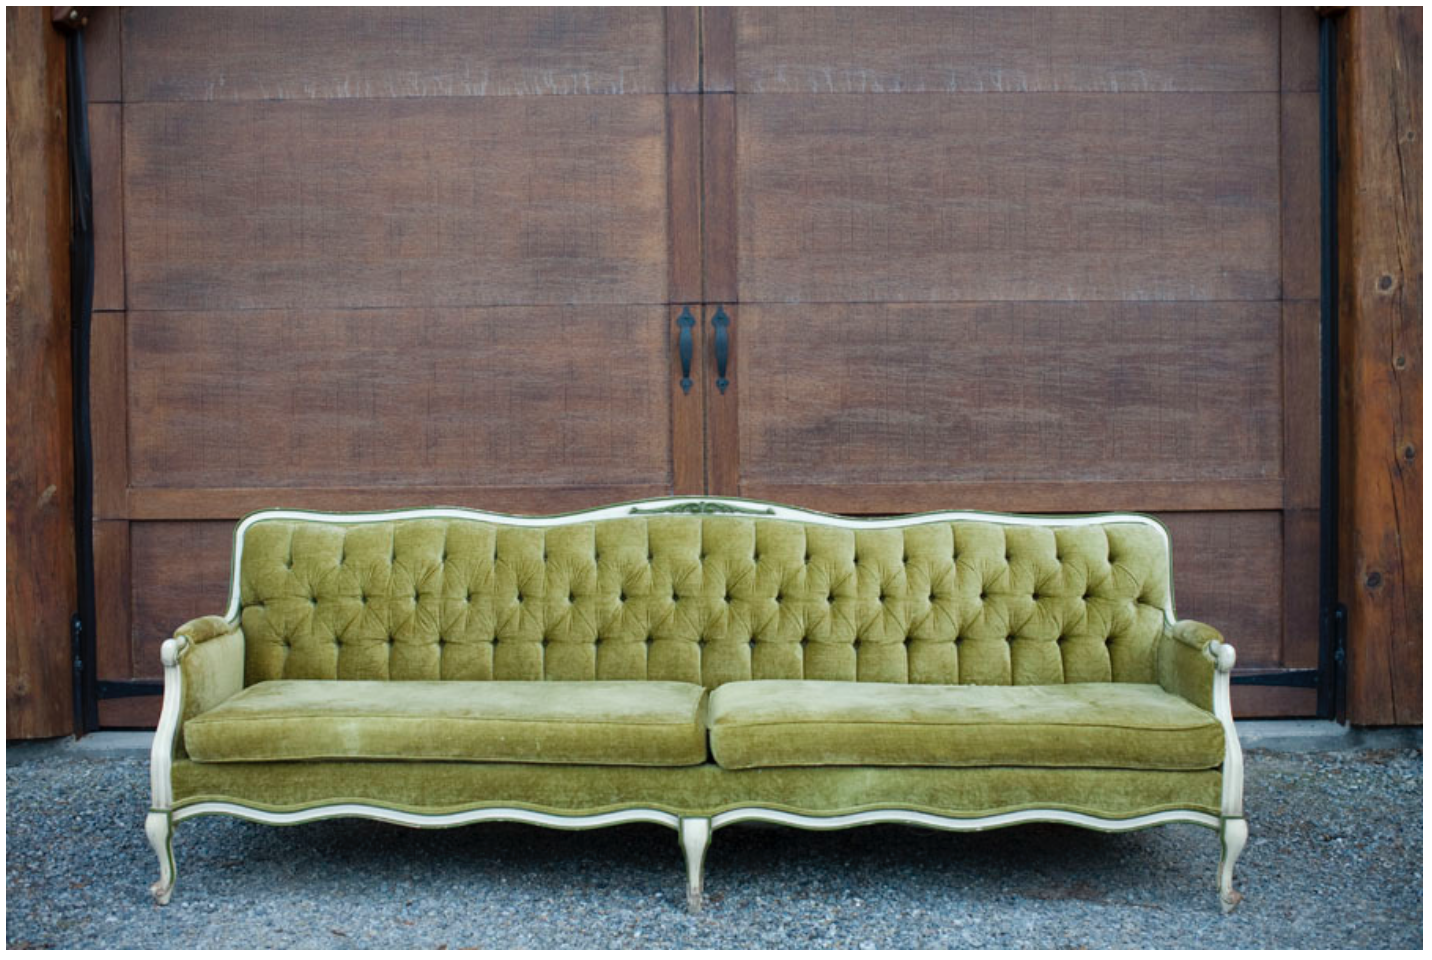 LOUNGE | UPHOLSTERED SEATING